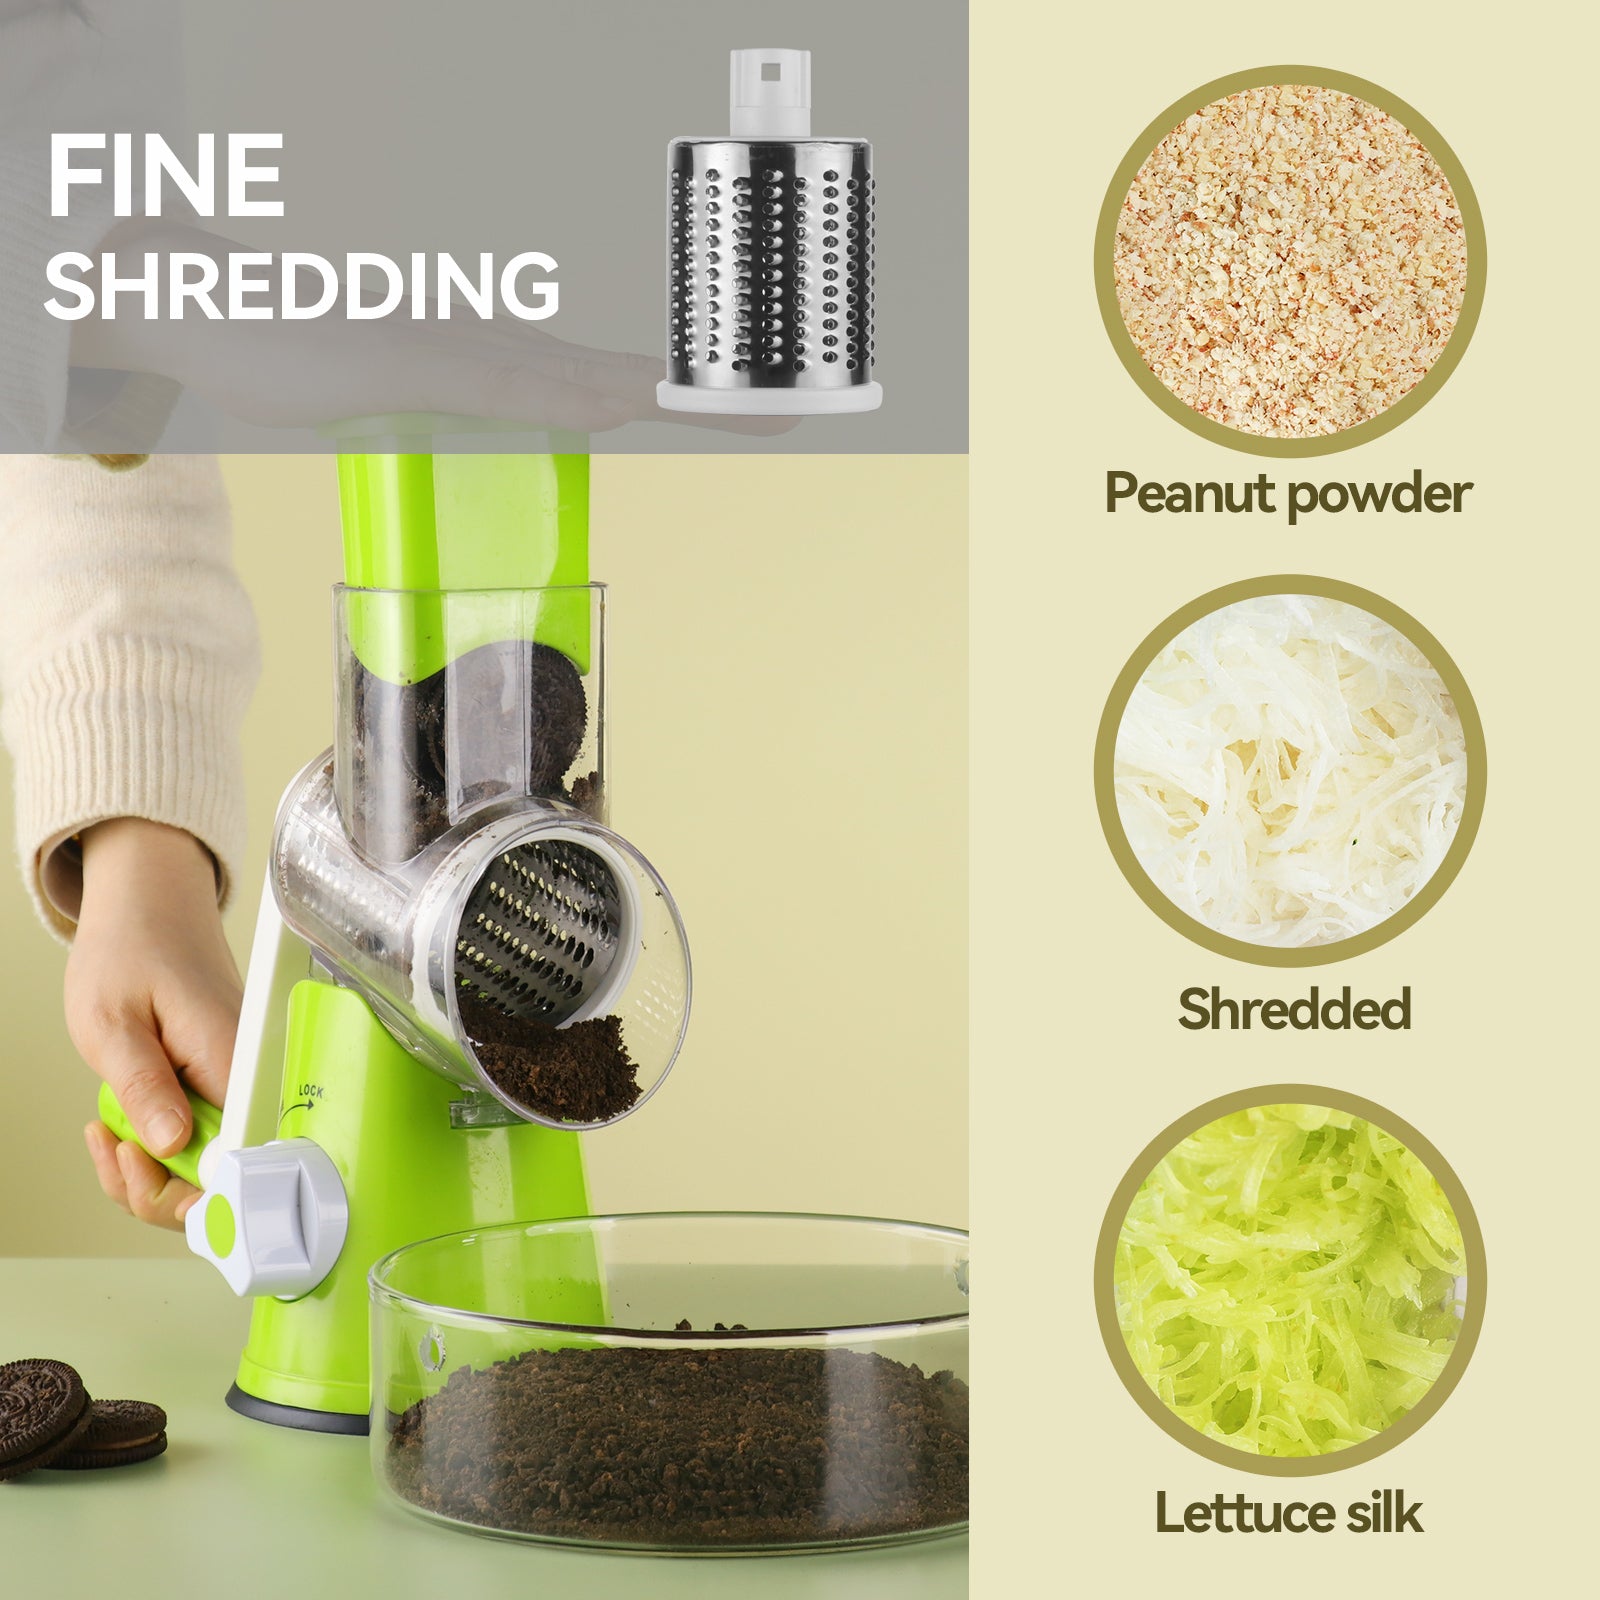 EDEFISY Cheese Grater - 3-in-1 Stainless Steel Manual Drum Slicer